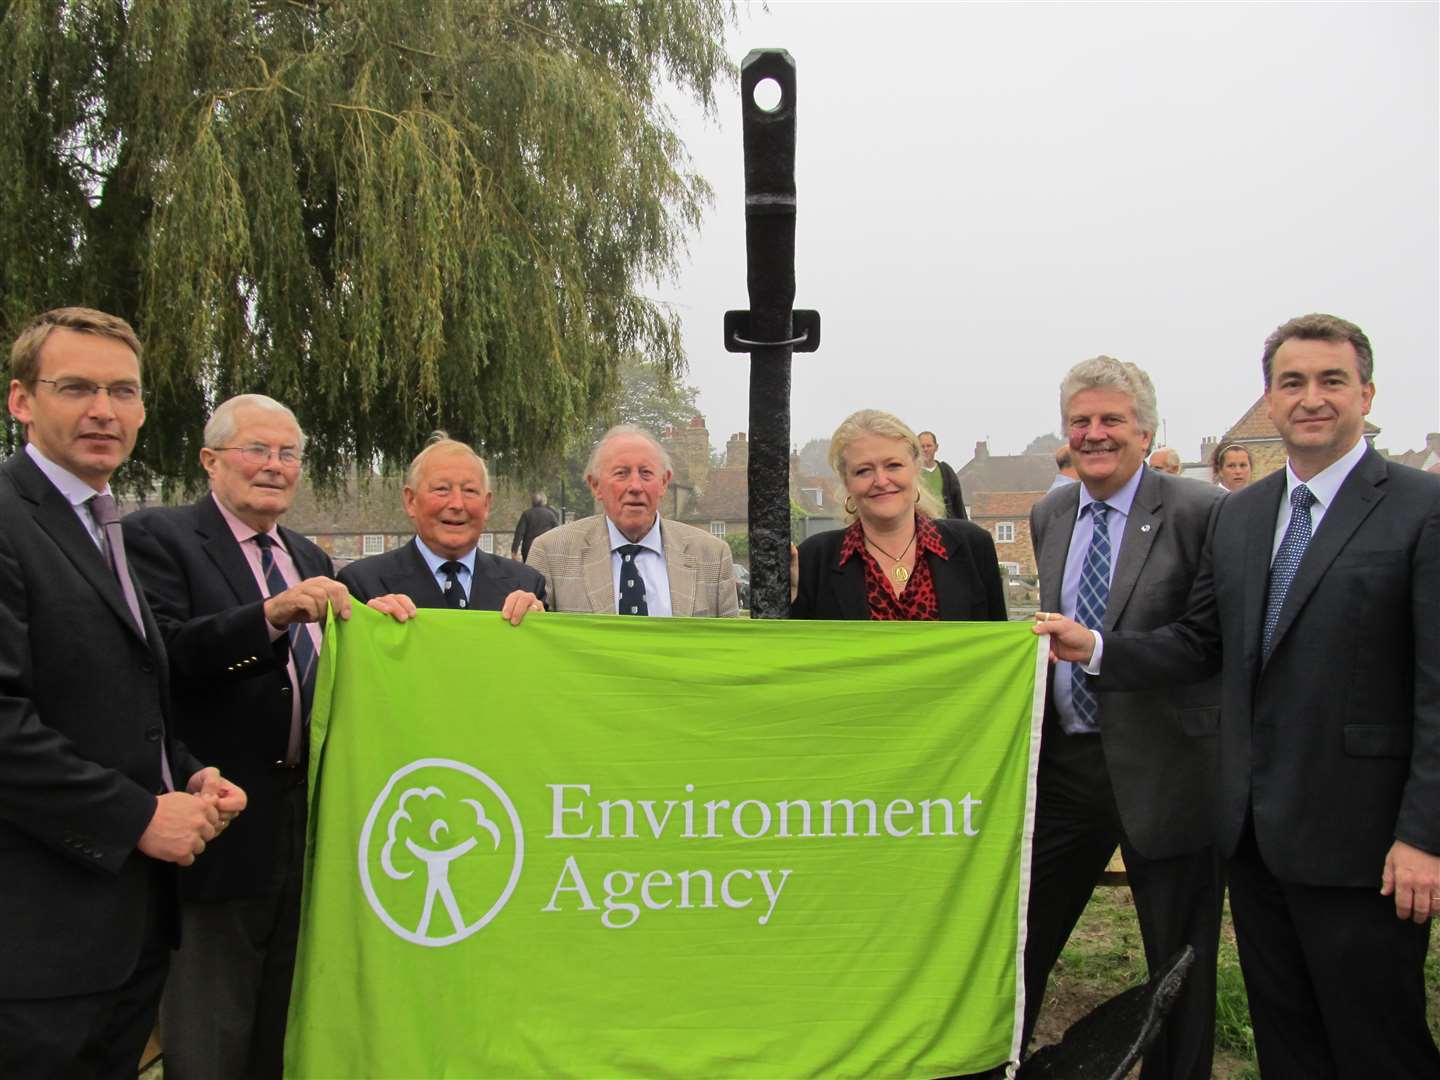 Andrew Pearce, Environment Agency, Cllr Watts, Cllr Trussler, Cllr Bragg, MP Laura Sandys, KCCs Mark Dance and John Oliphant from Pfizer.